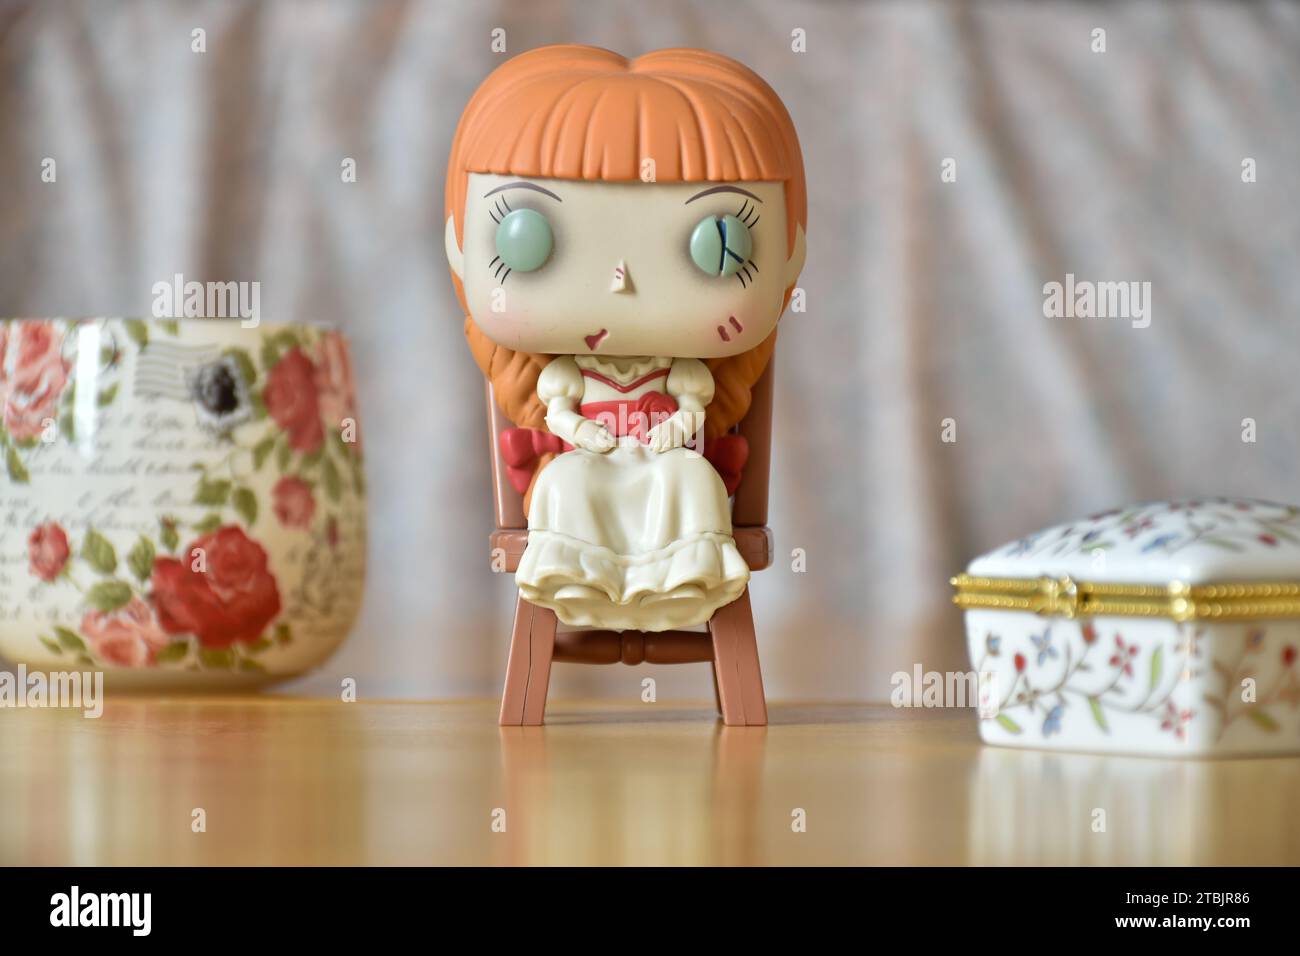 Funko Pop action figure of  haunted doll Annabelle from The Conjuring horror films. Vintage interior, white flower printed jewelry box and vase. Stock Photo